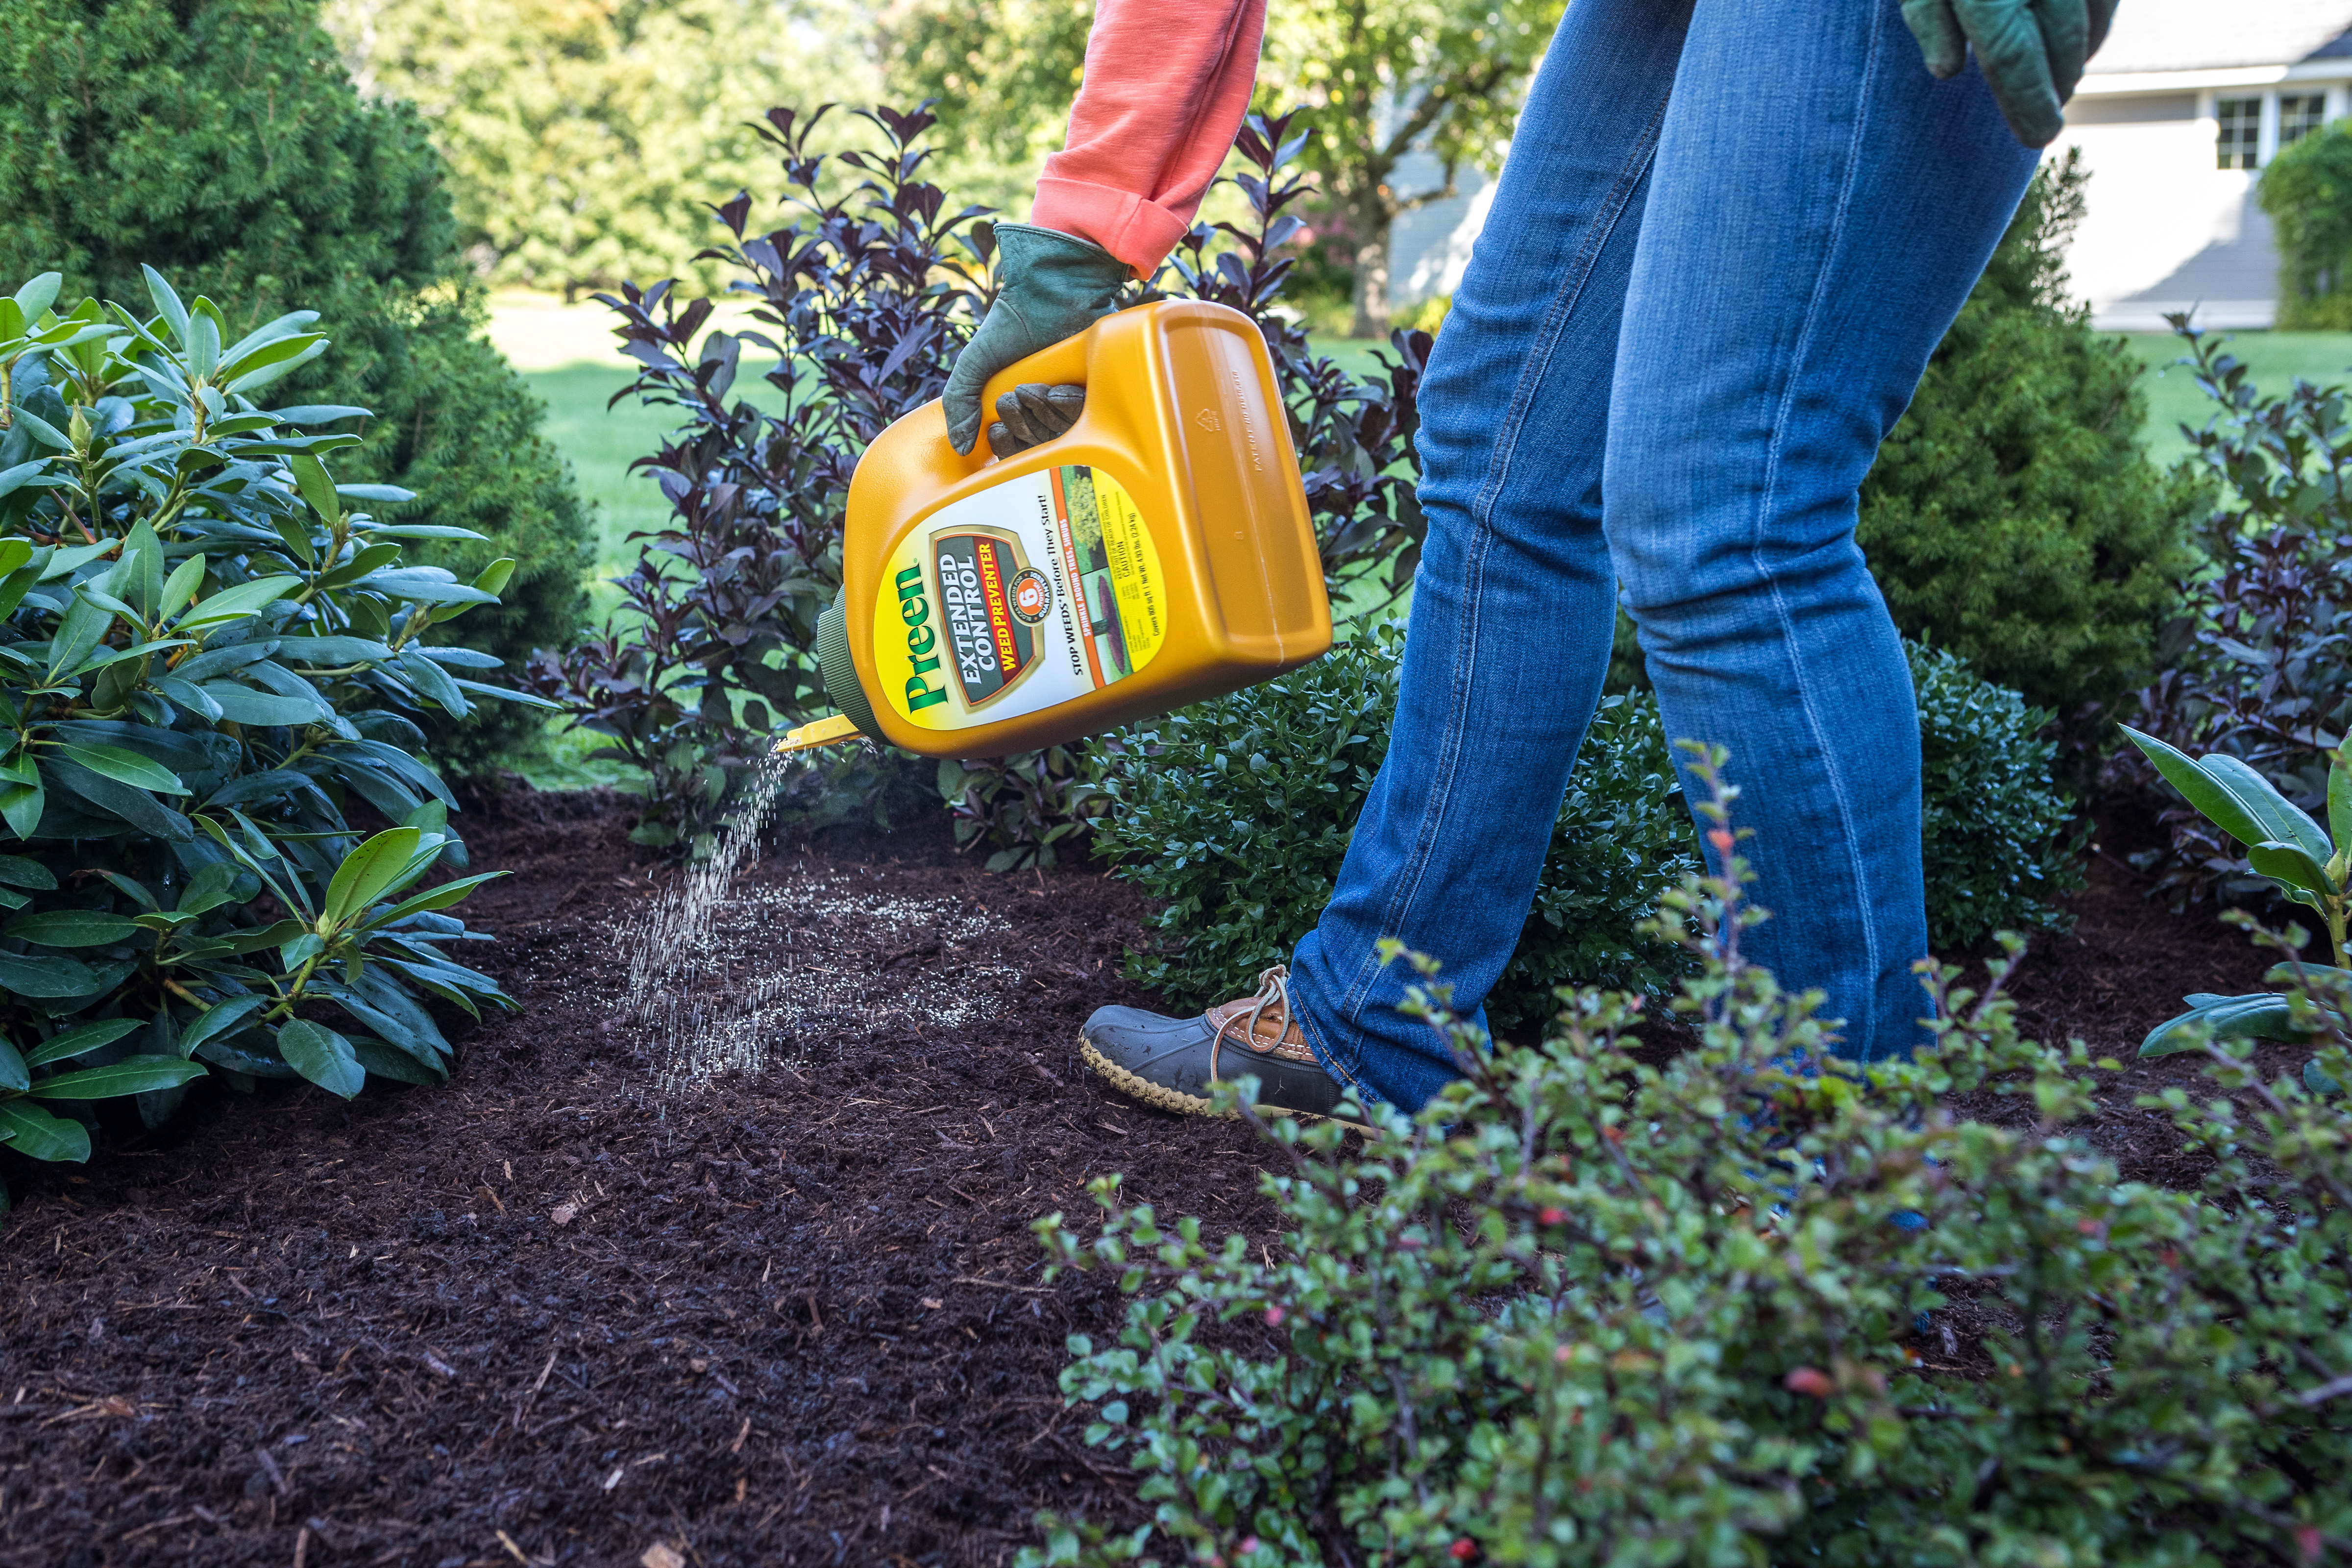 Applying Preen Extended Control Weed Preventer around shrubs over mulch to control weeds.